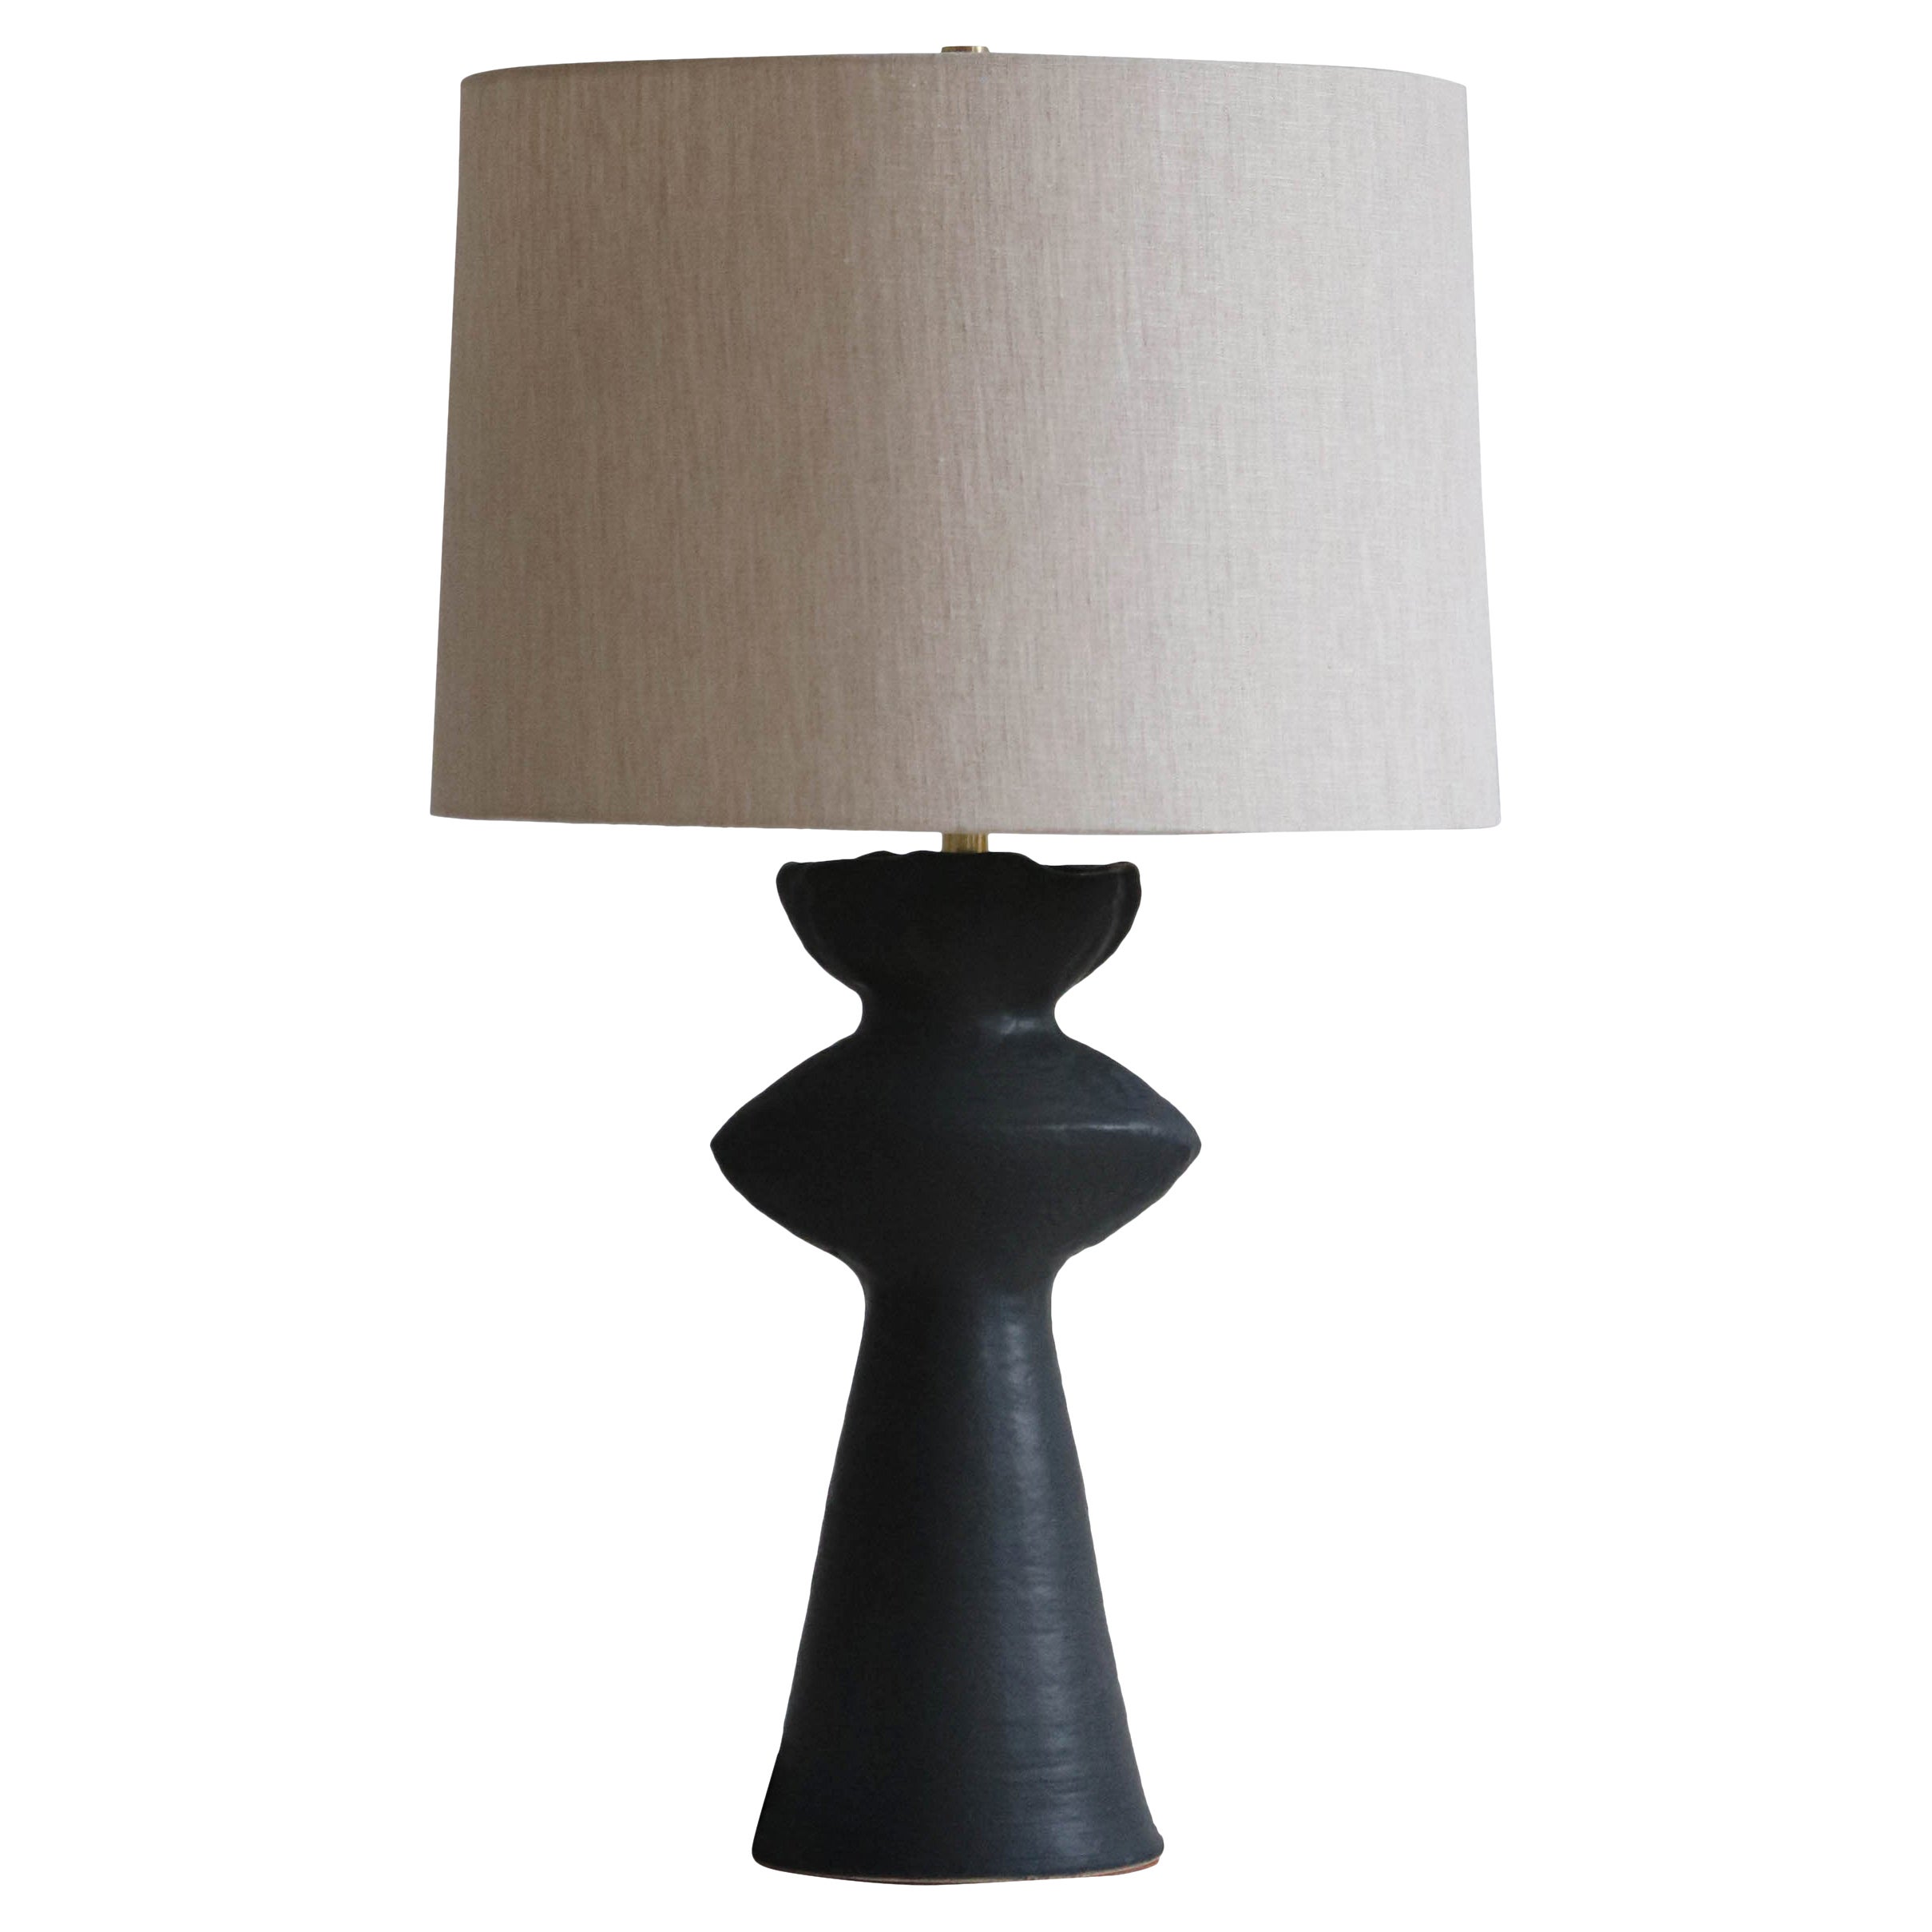 Anthracite Cicero 26 Table Lamp by  Danny Kaplan Studio For Sale